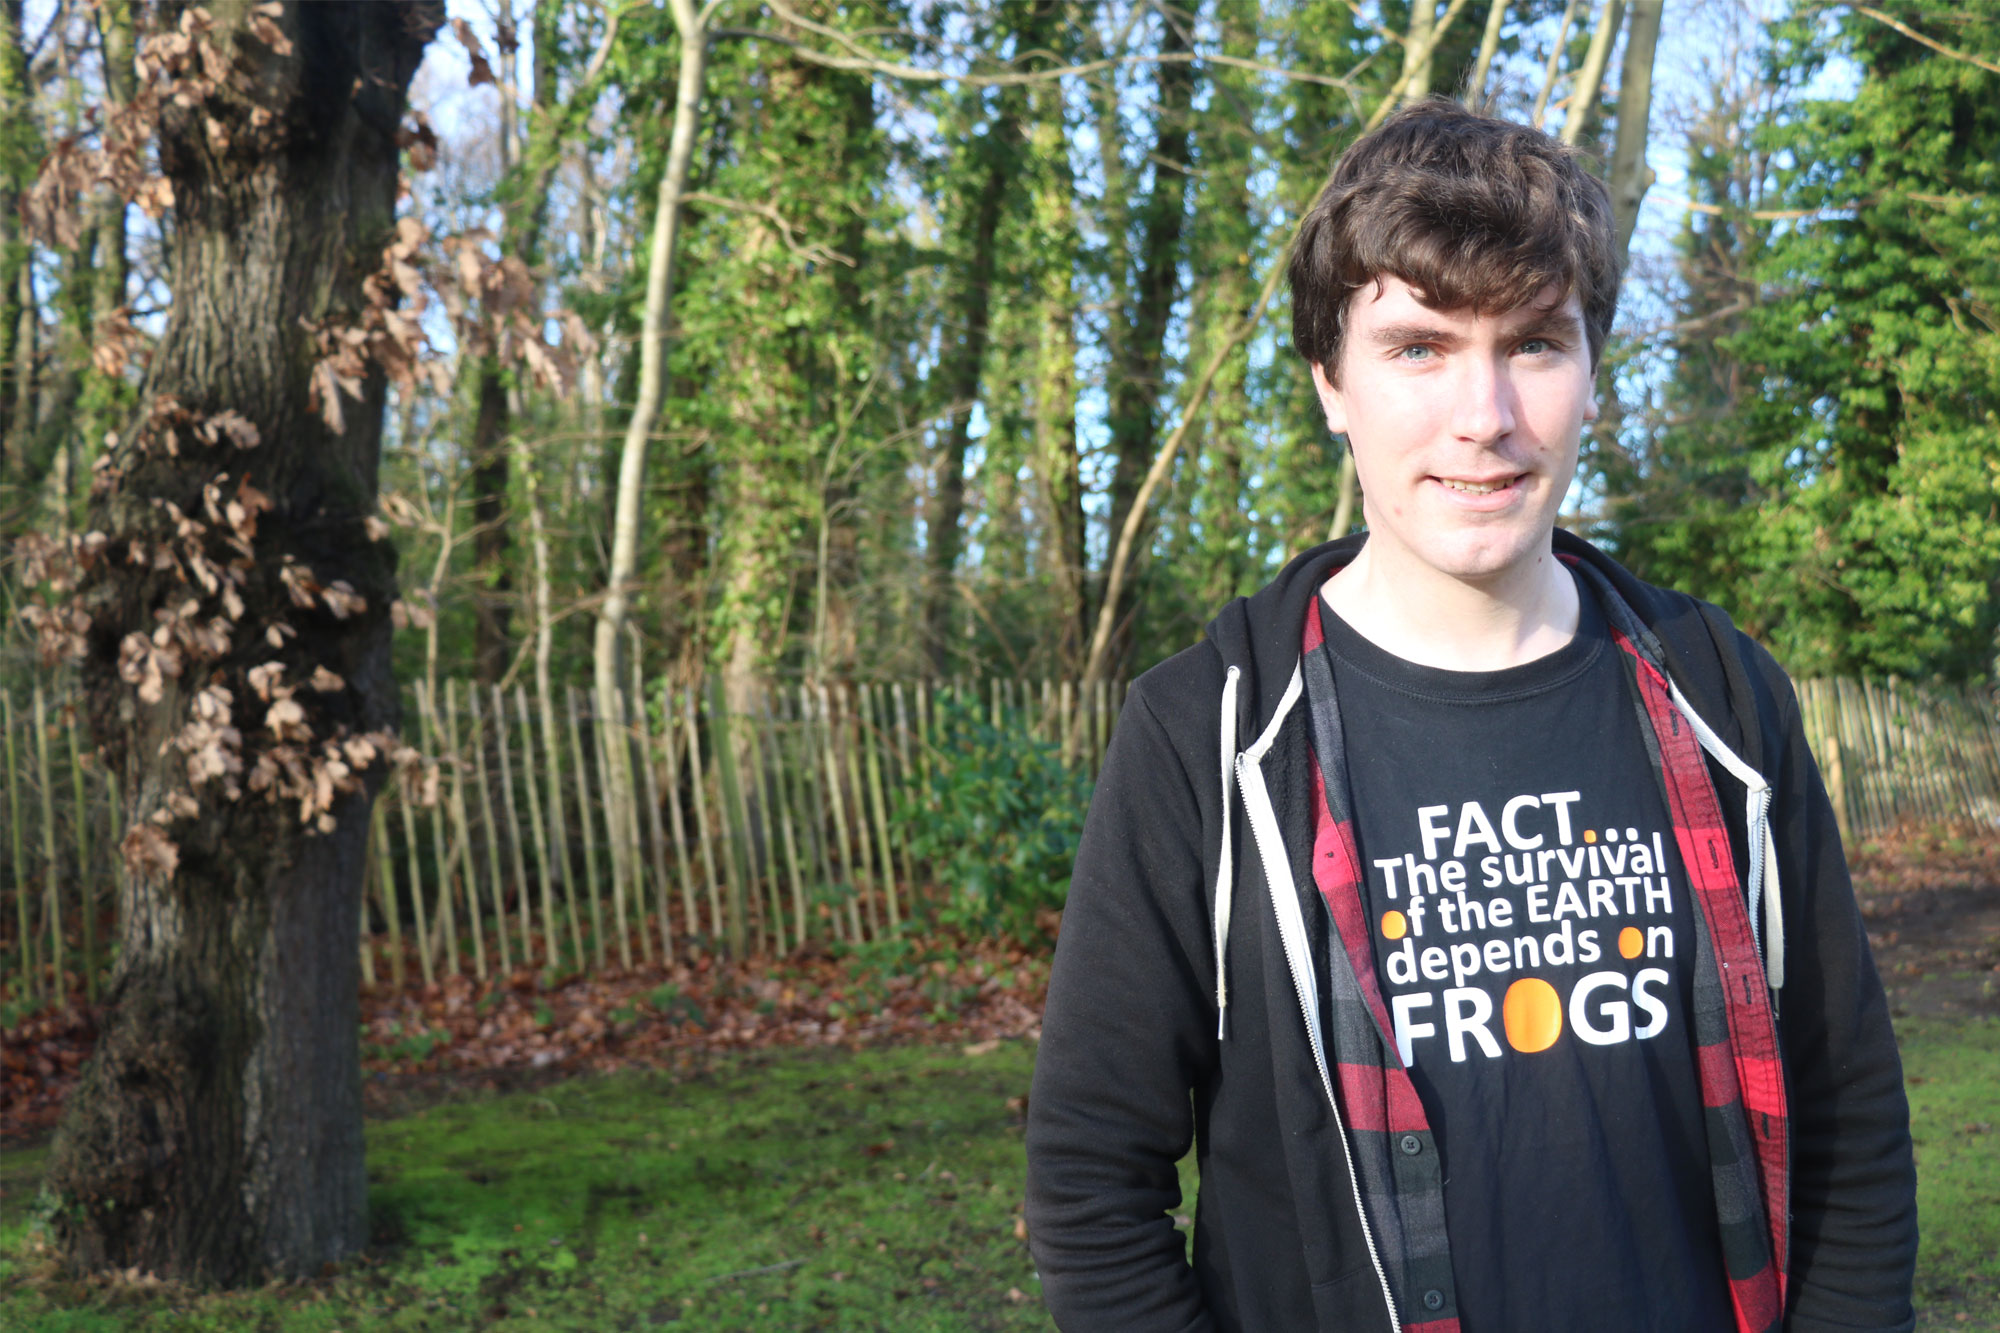 Steven Allain outside with T-shirt emblazoned with 'FACT...The survival of the earth depends on frogs'.